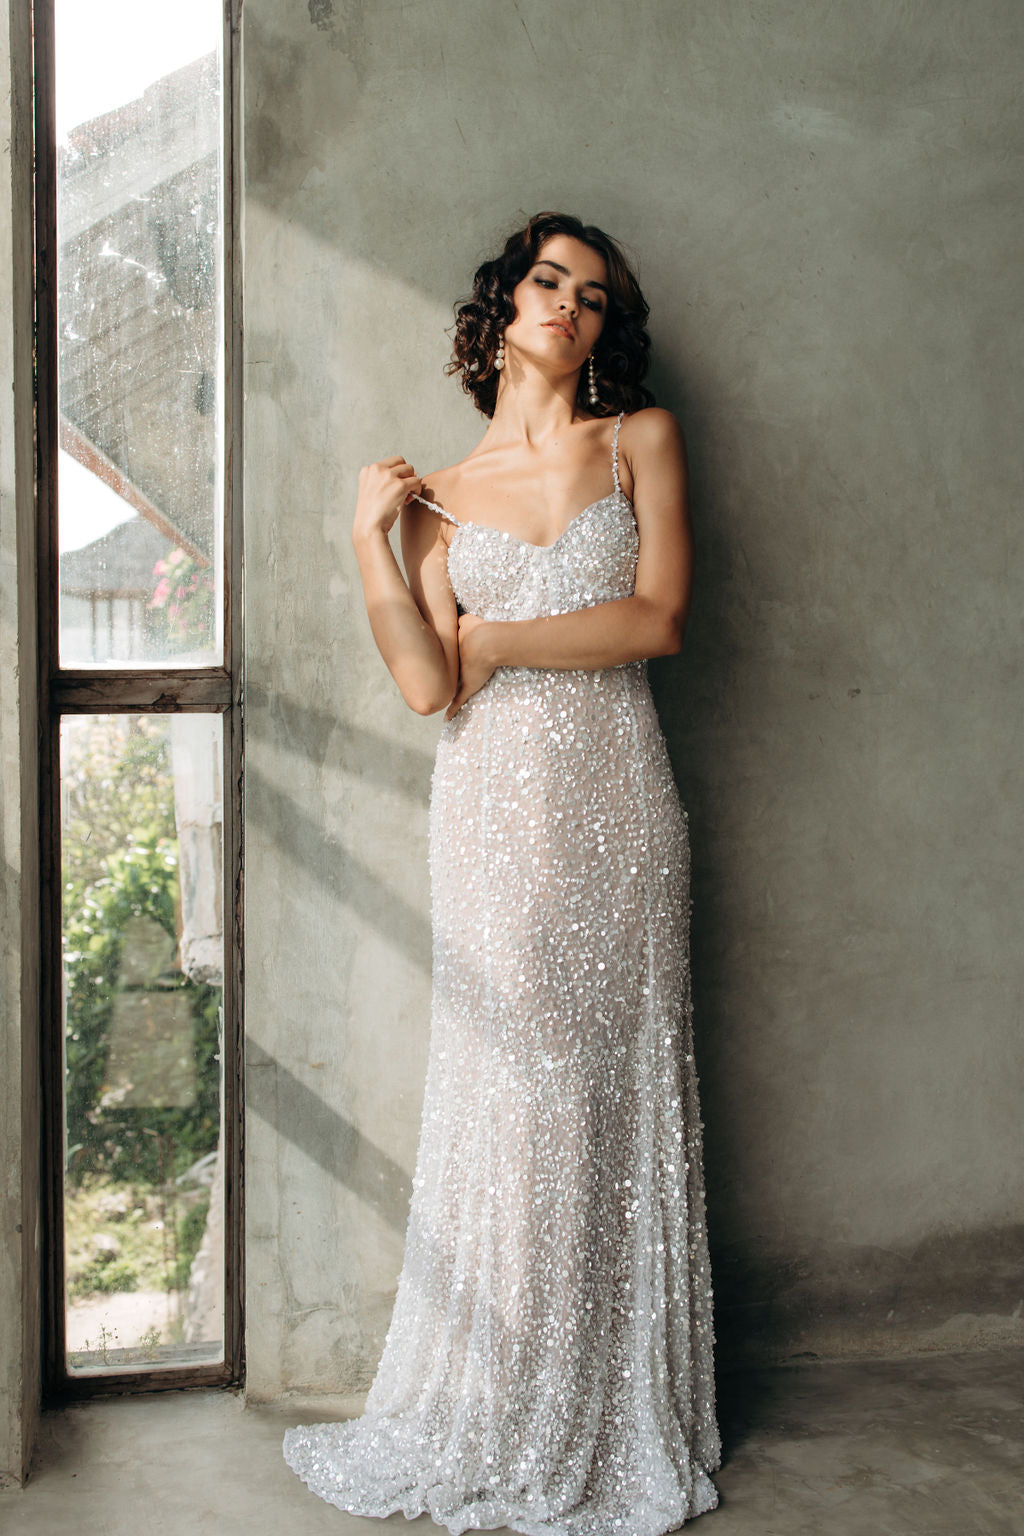 "Aphrodite" Elizabeth Grace Couture stunning beaded wedding gown